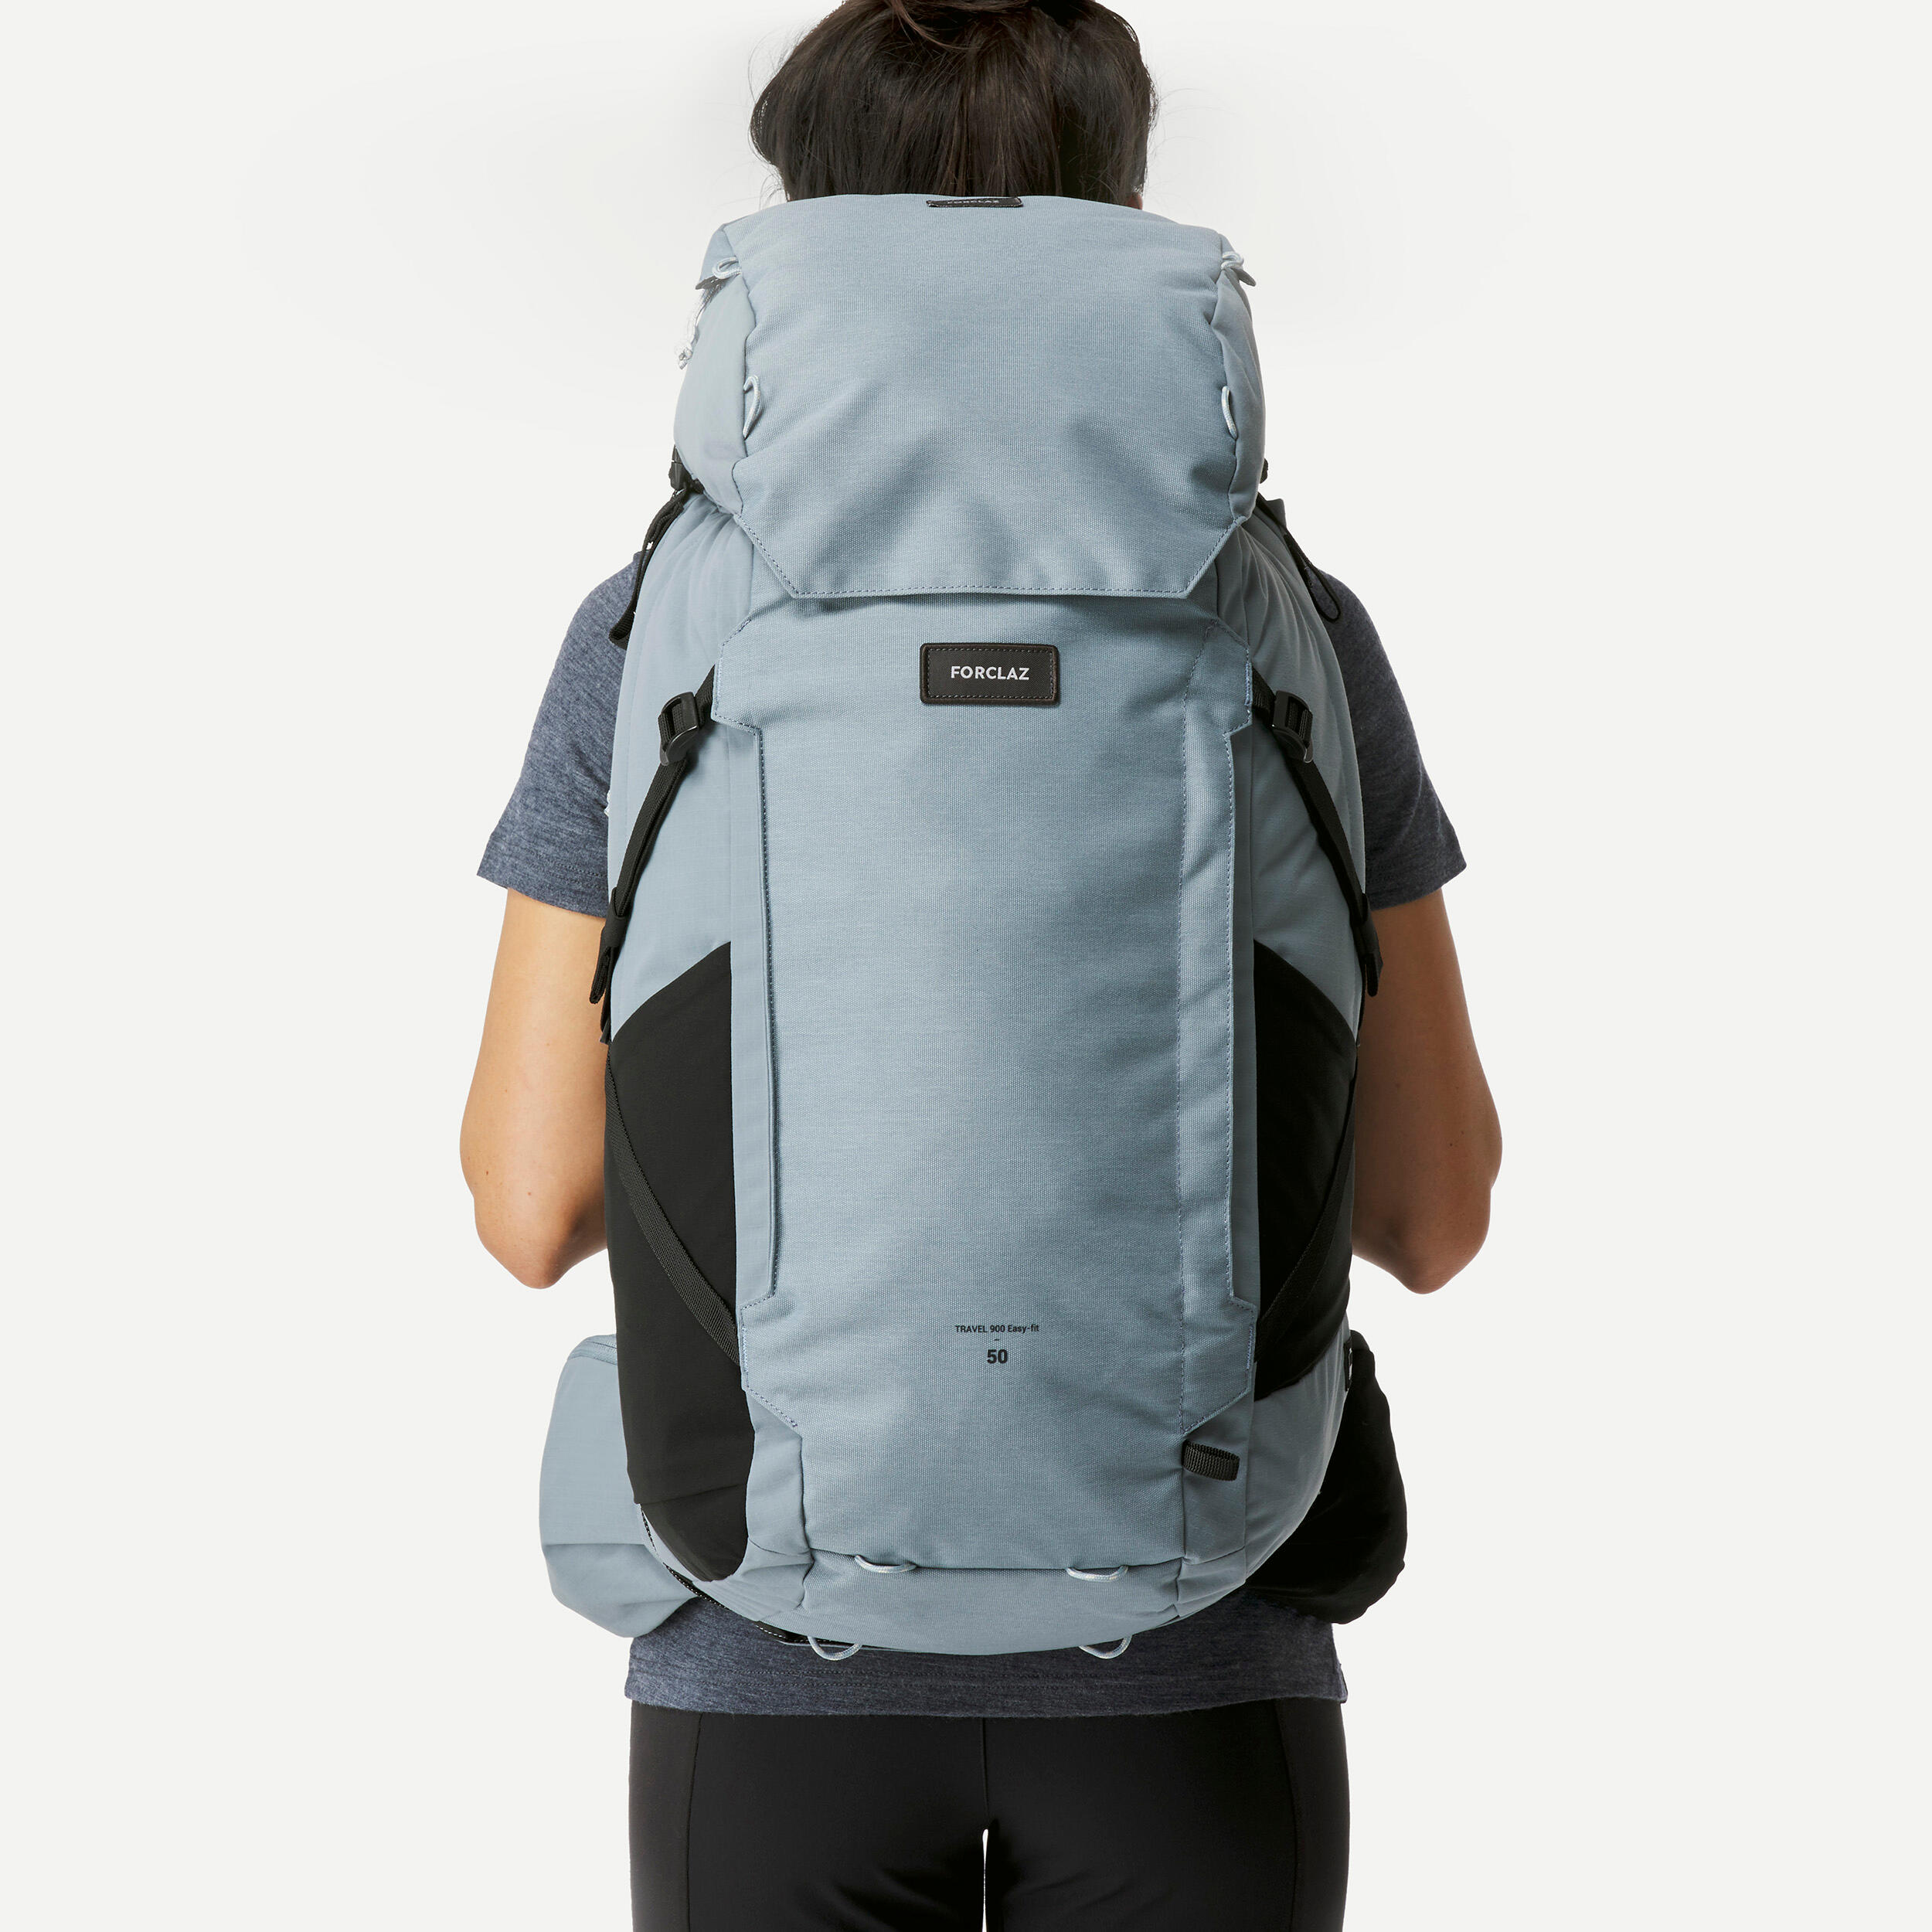 Women's Hiking Backpack - Travel 900 Blue - Mouse grey - Forclaz - Decathlon